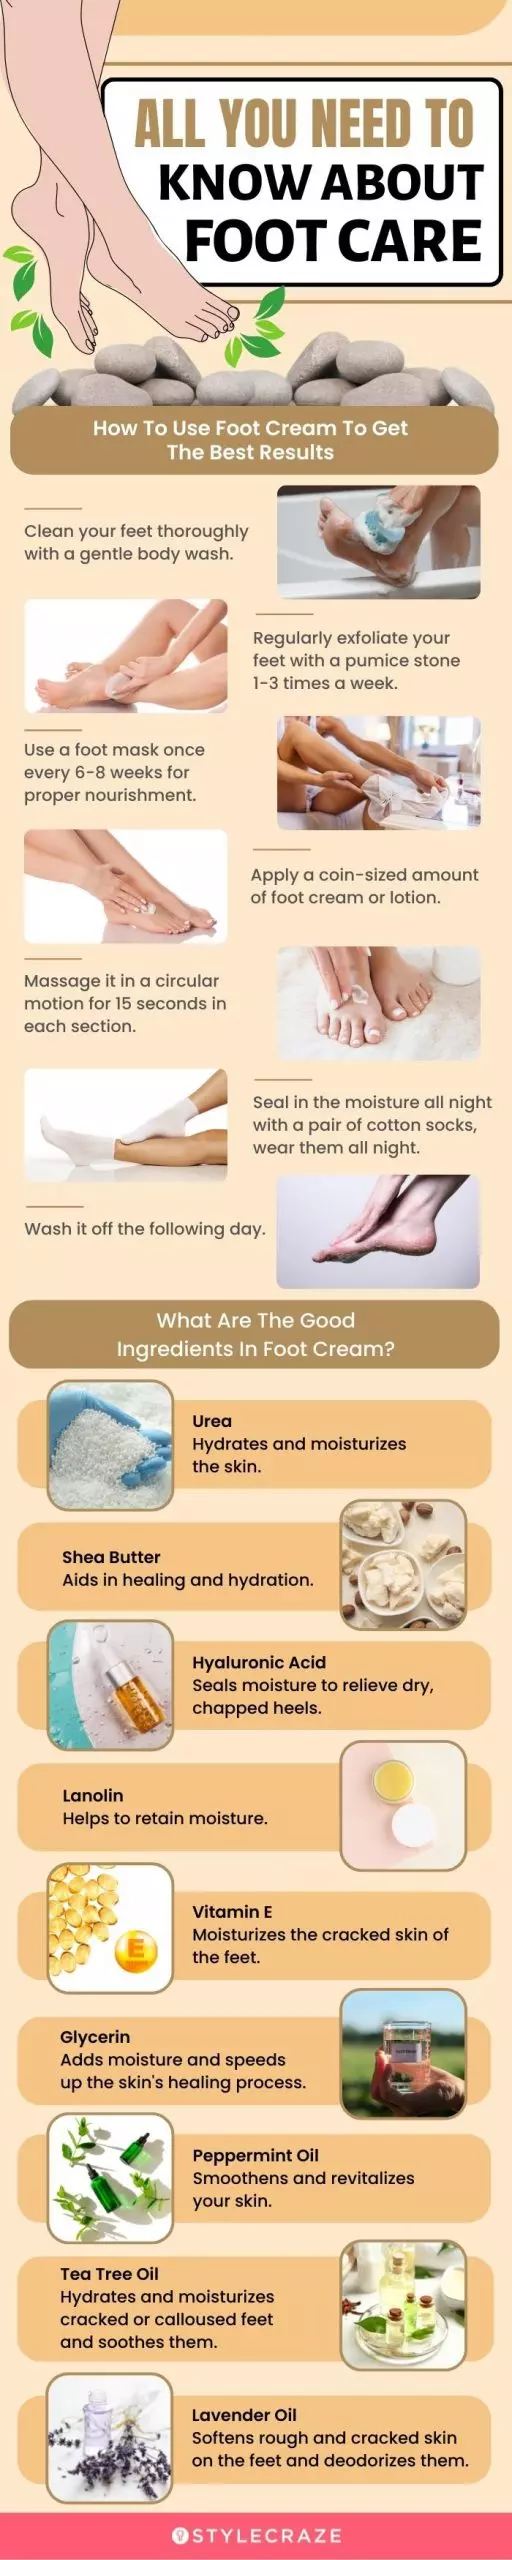 All You Need To Know About Foot Care (infographic)